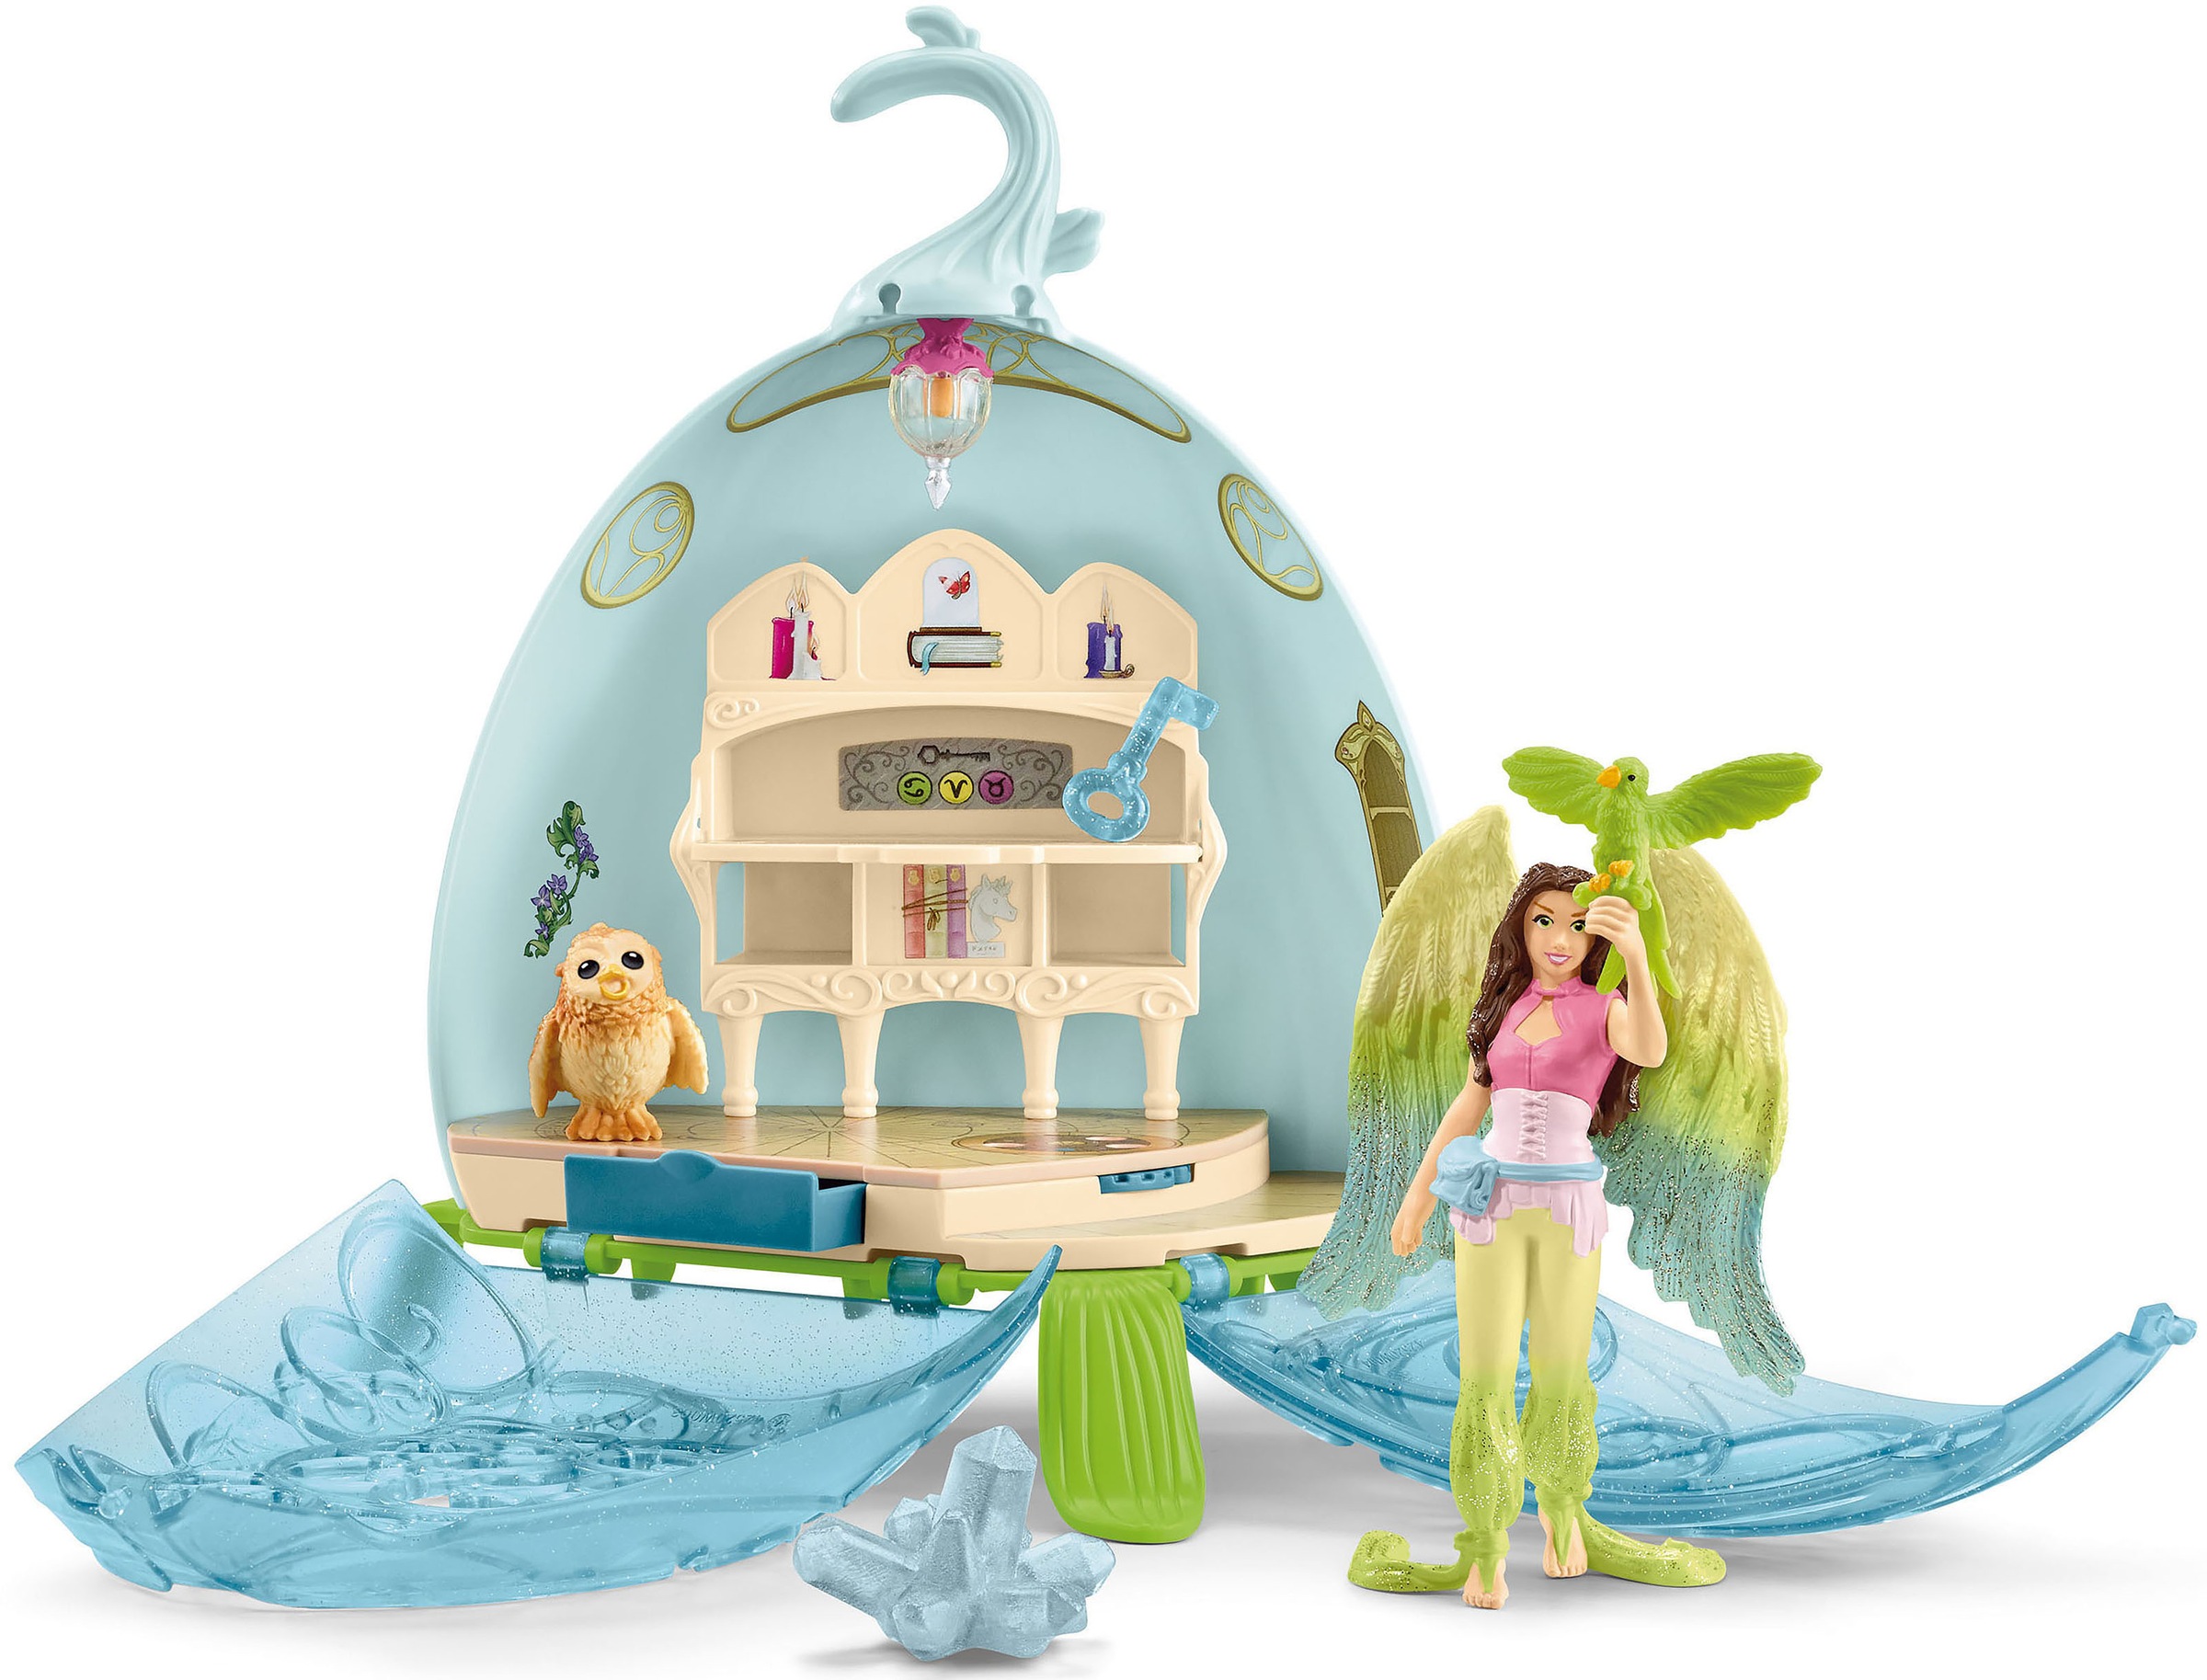 Schleich Bayala Mystic Library Toy Playset, 5 to 12 Years,...